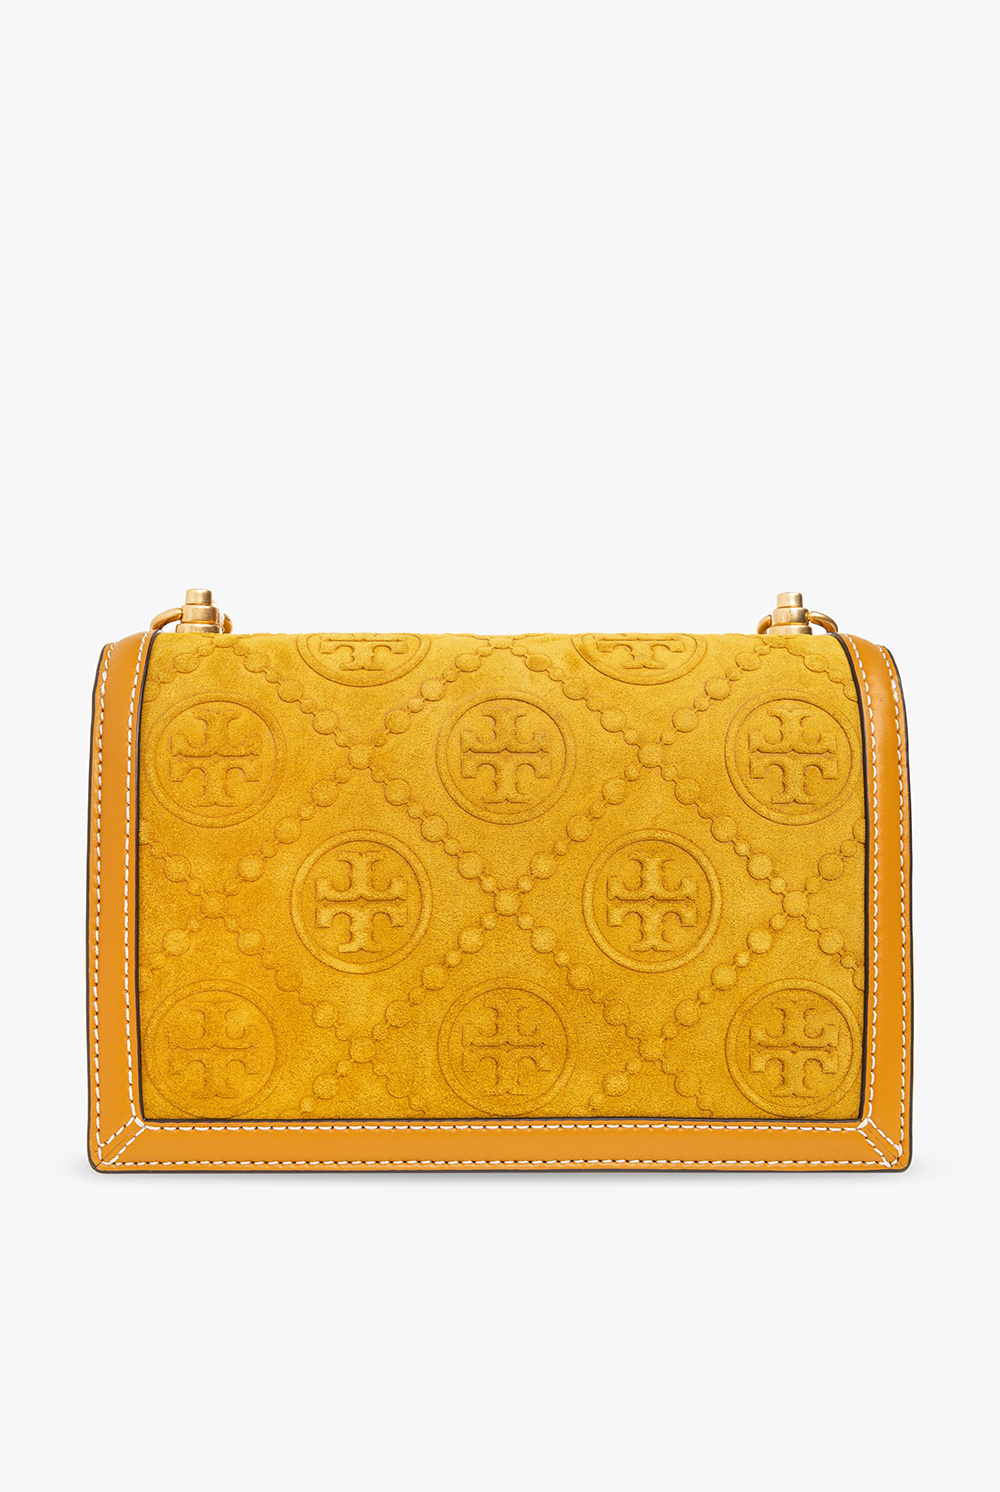 Tory Burch 'T Monogram Small' shoulder bag in suede